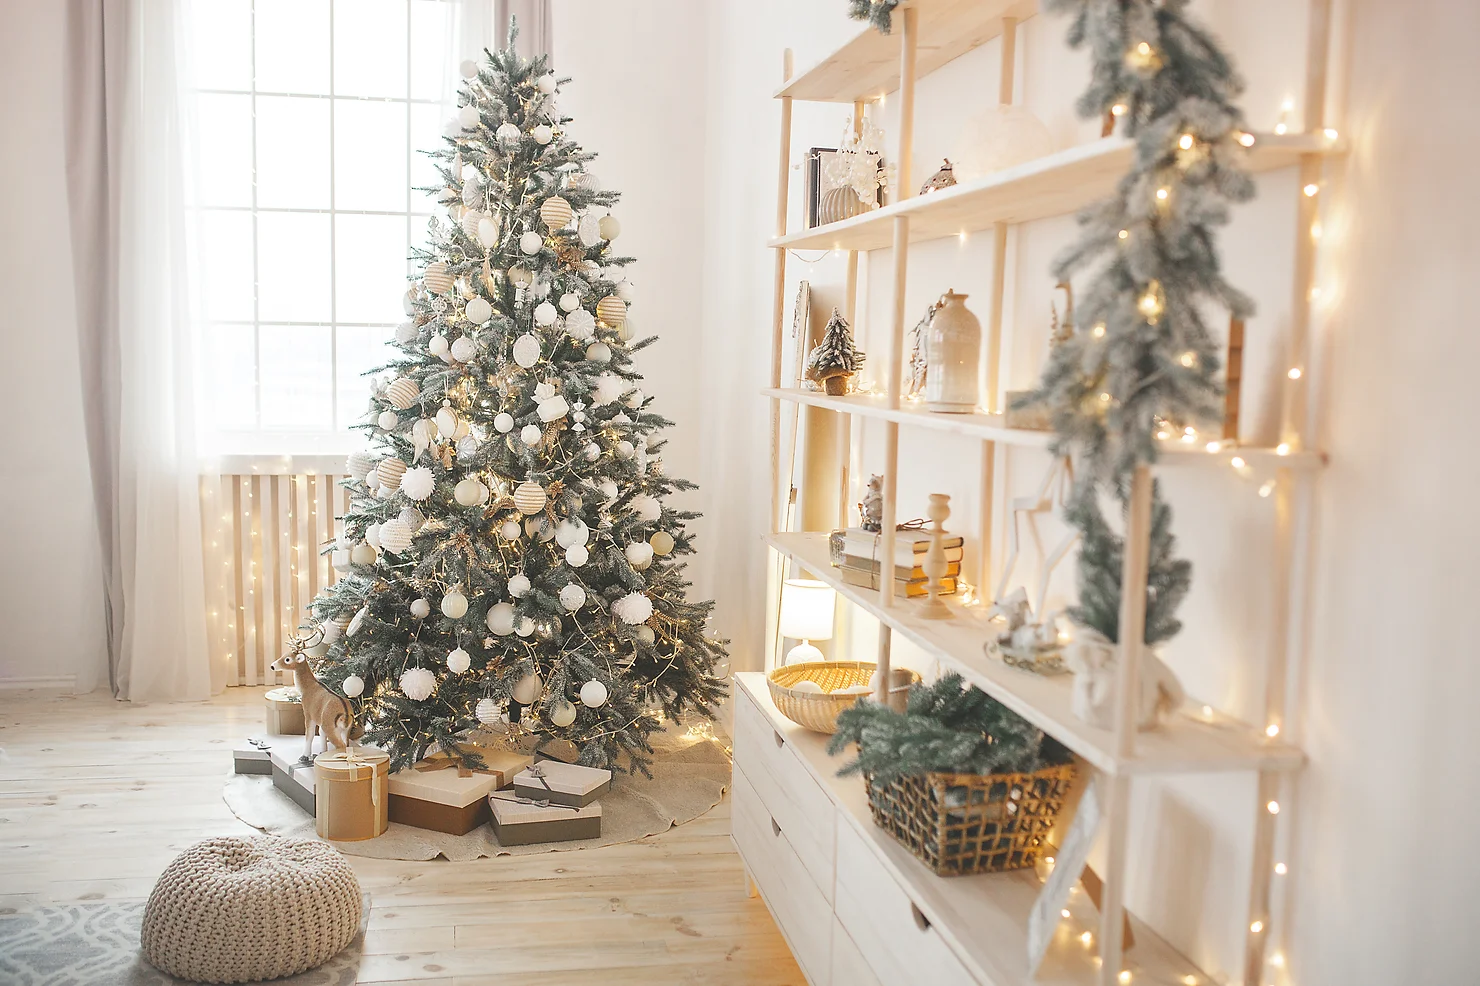 A cozy room decorated for Christmas with a decorated tree, gifts, and a lit bookshelf creating a warm, festive atmosphere.